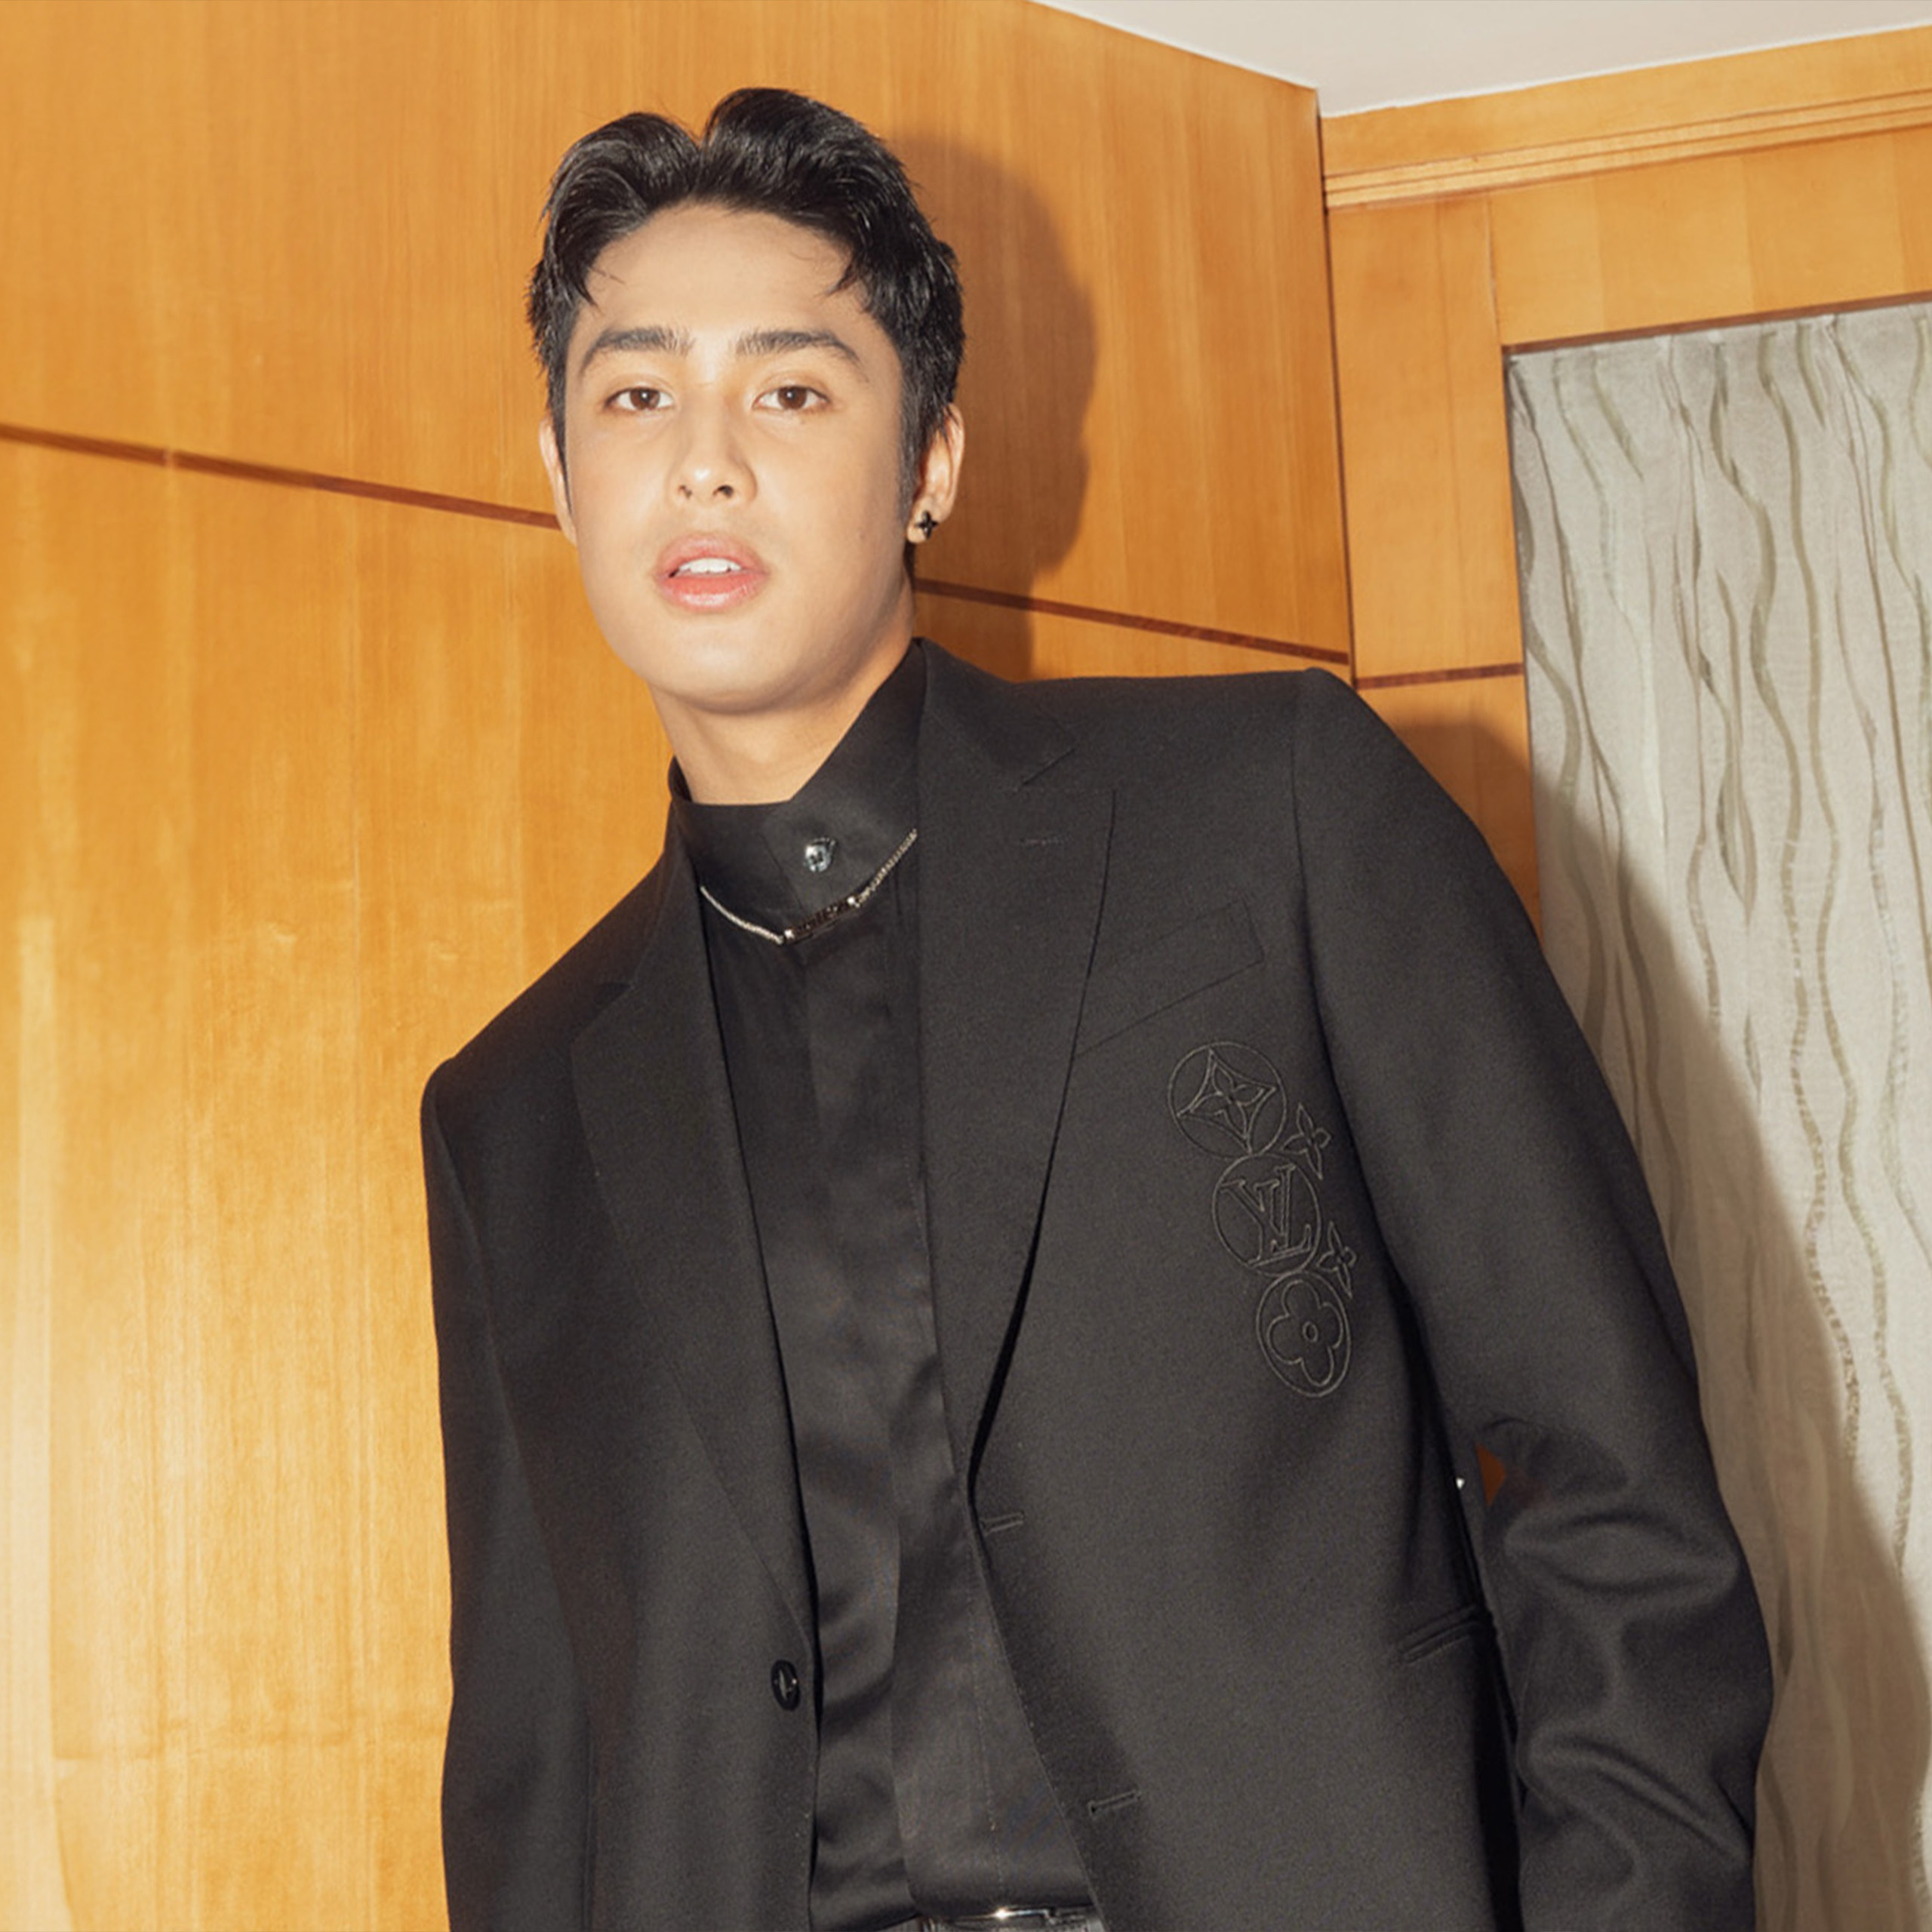 Stylist John Lozano Shares Secrets Behind Donny Pangilinan’s Style For the ABS-CBN Ball